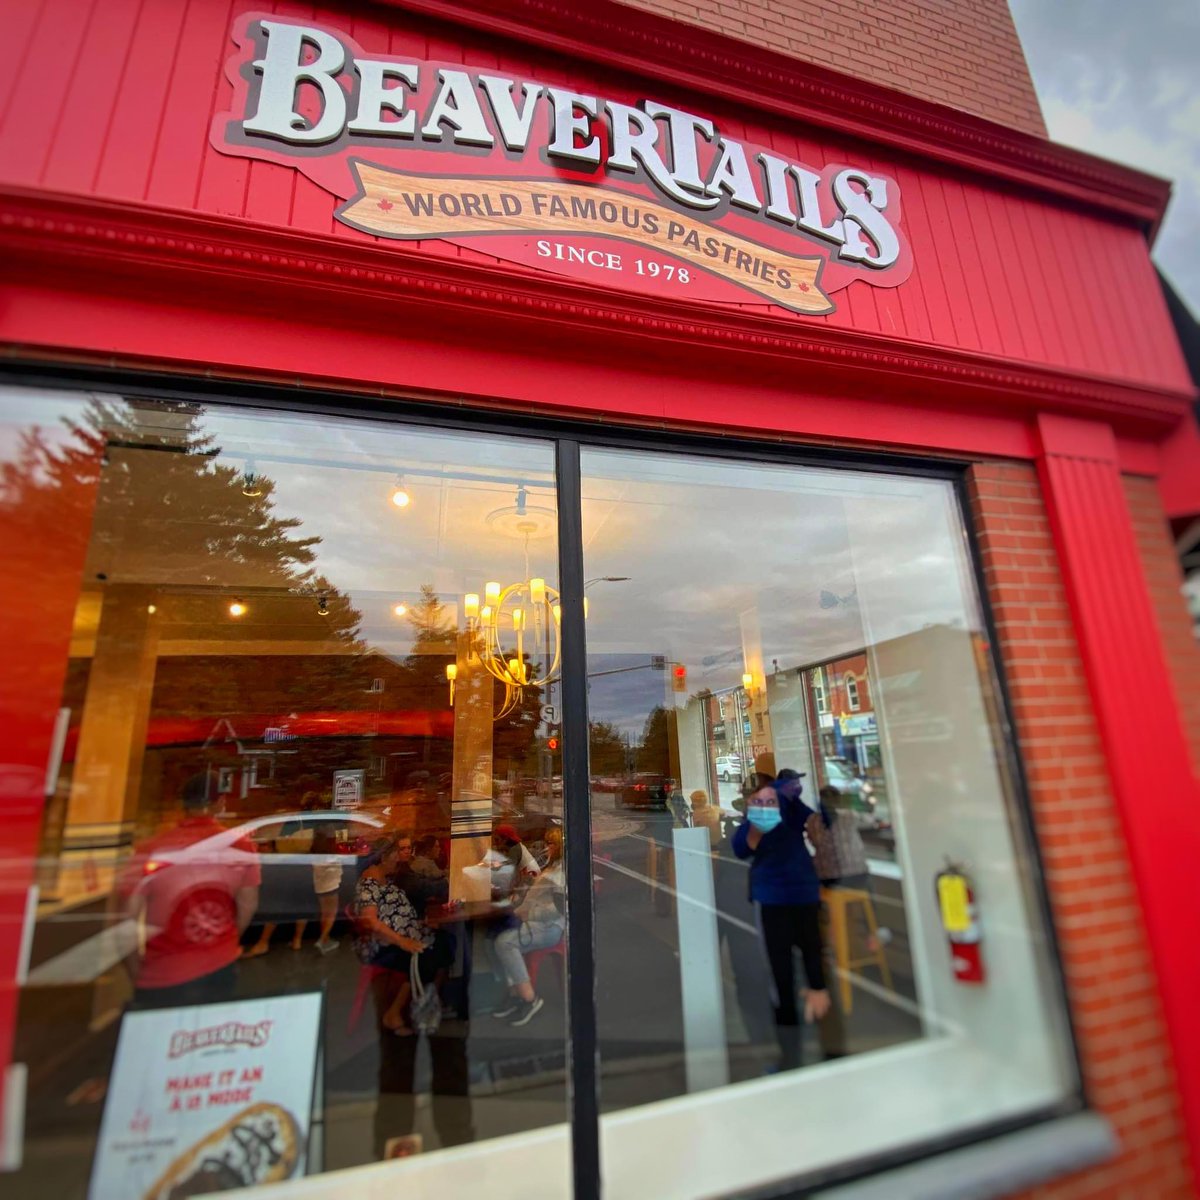 BeaverTails in Huntsville, Ontario

We've been huge fans since we tried BeaverTails during our weekend getaway in Ottawa. At this little spot, their specialty is in the name. A BeaverTail is often descri...
#beavertails #huntsville #ontario #huntsvilleontario #wheretoeatinontario